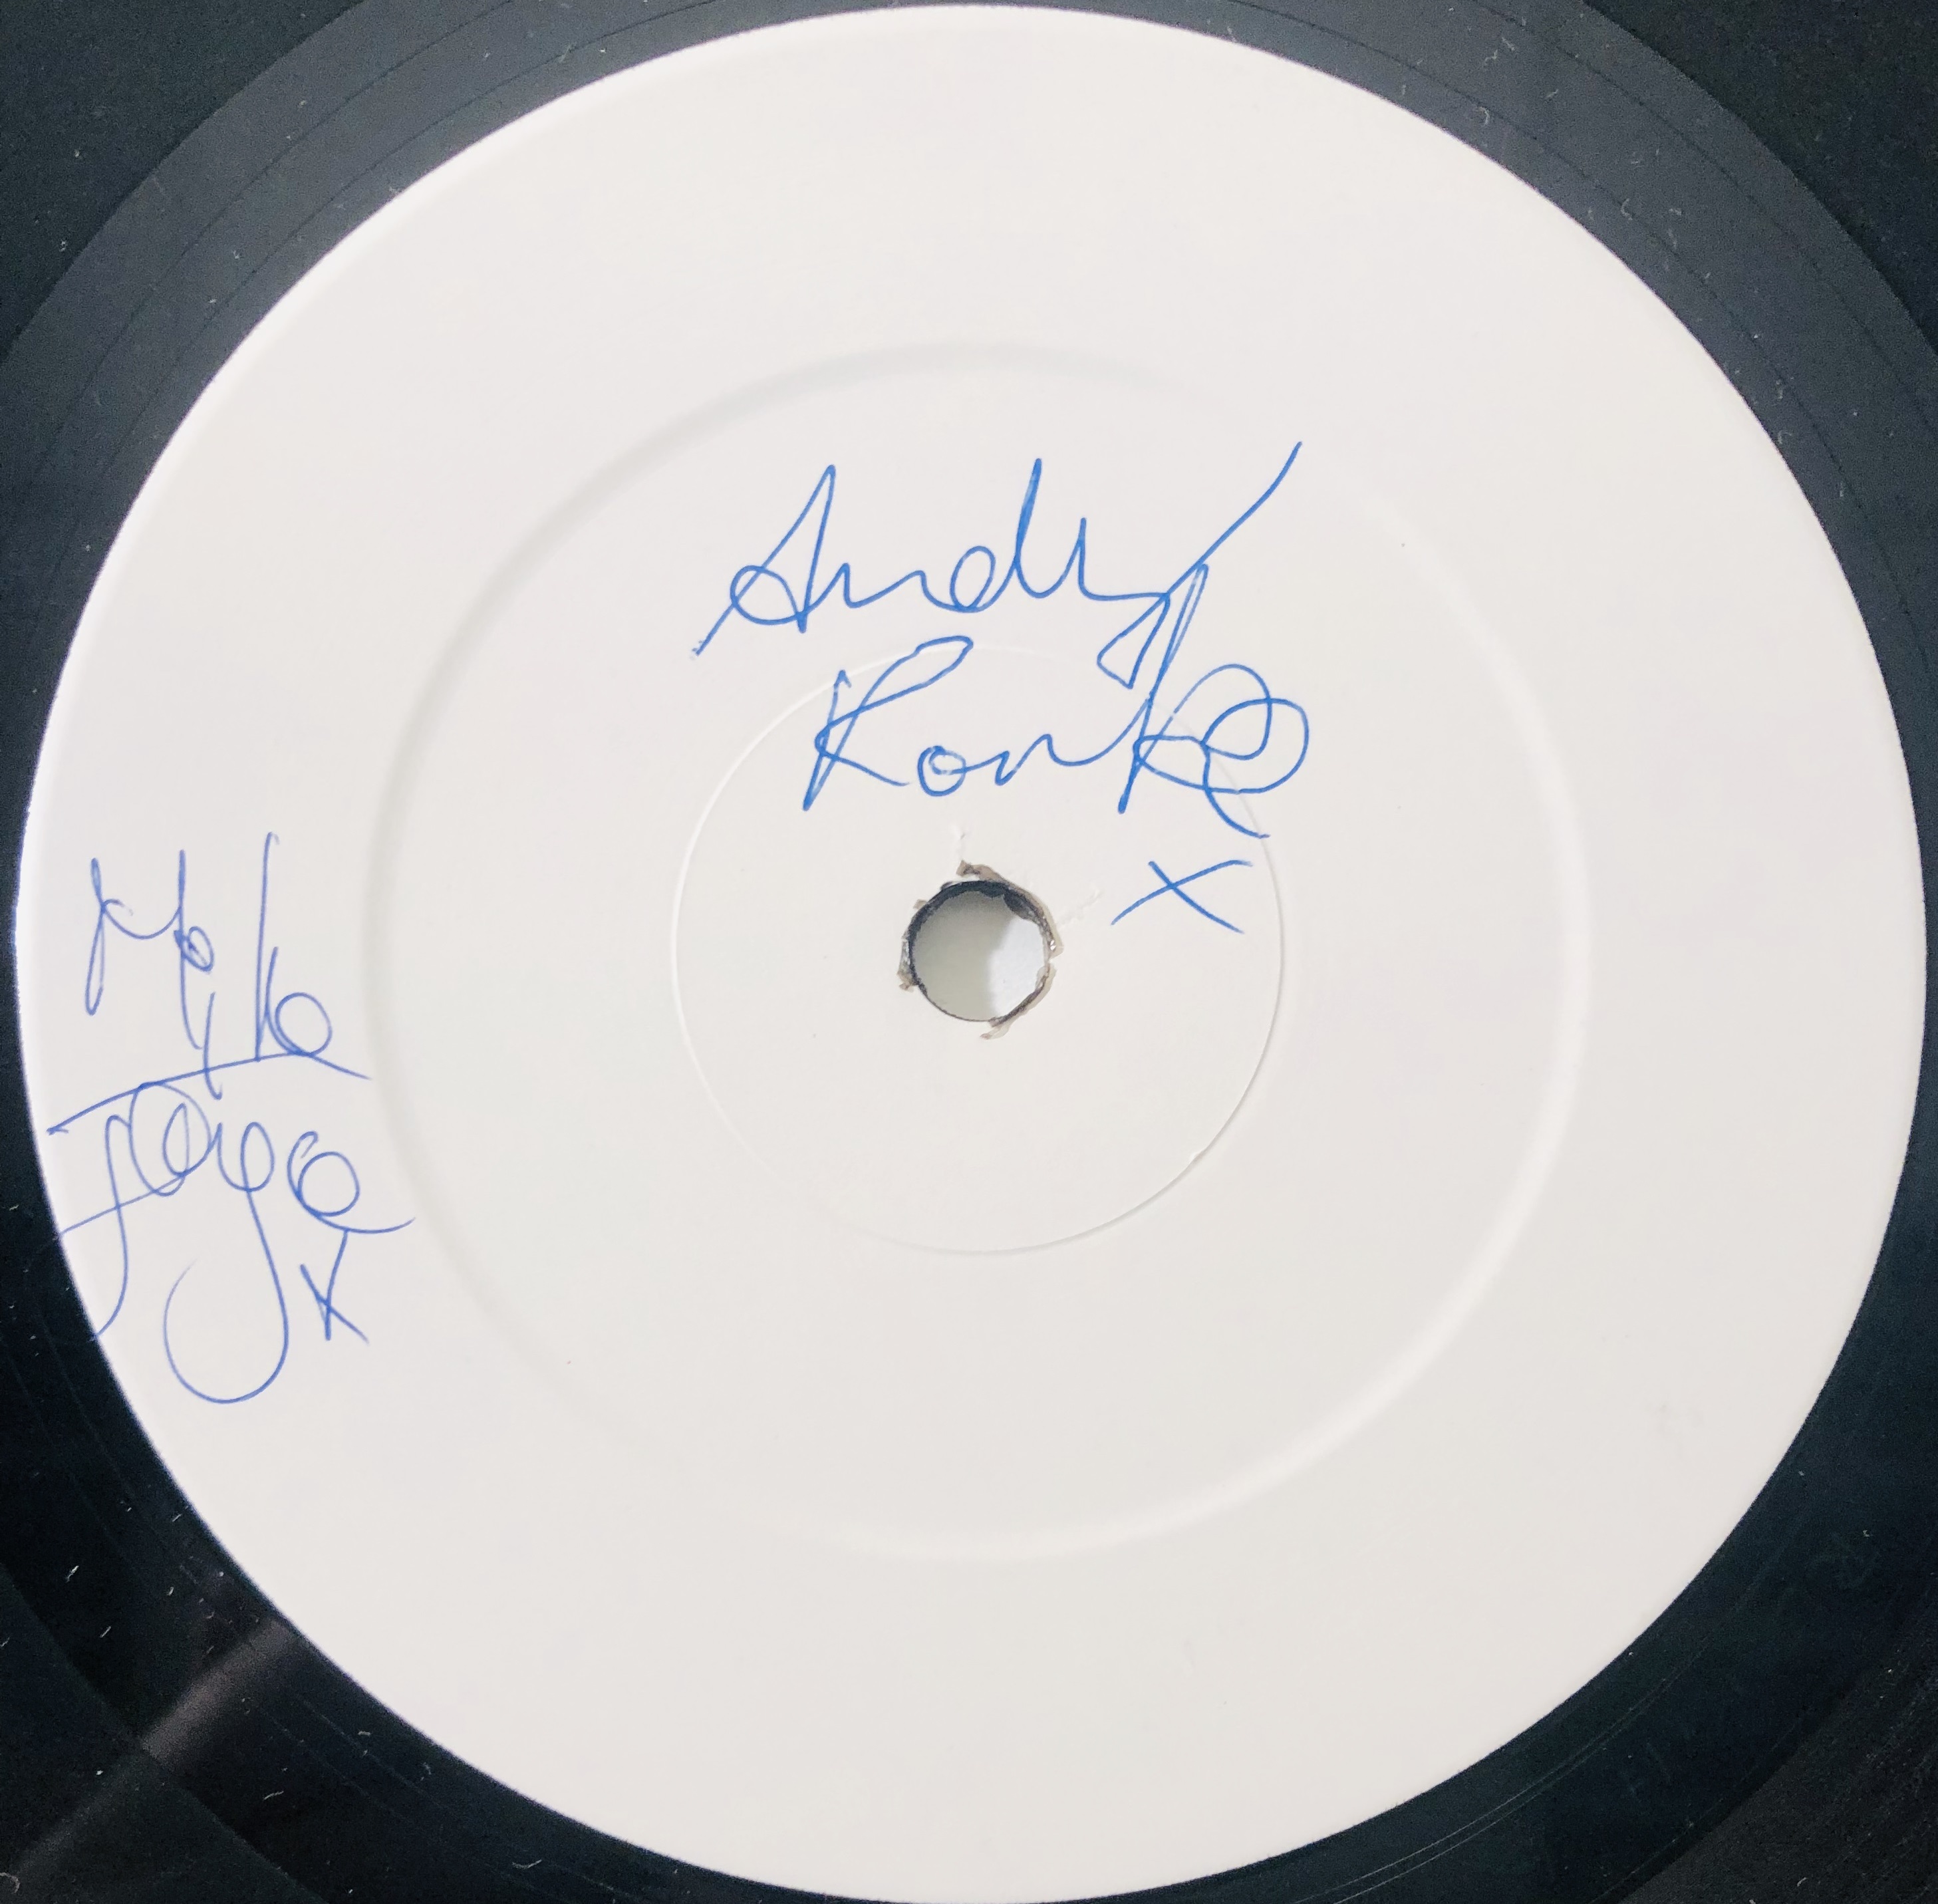 THE SMITHS SIGNED WHITE LABEL. - Image 2 of 3